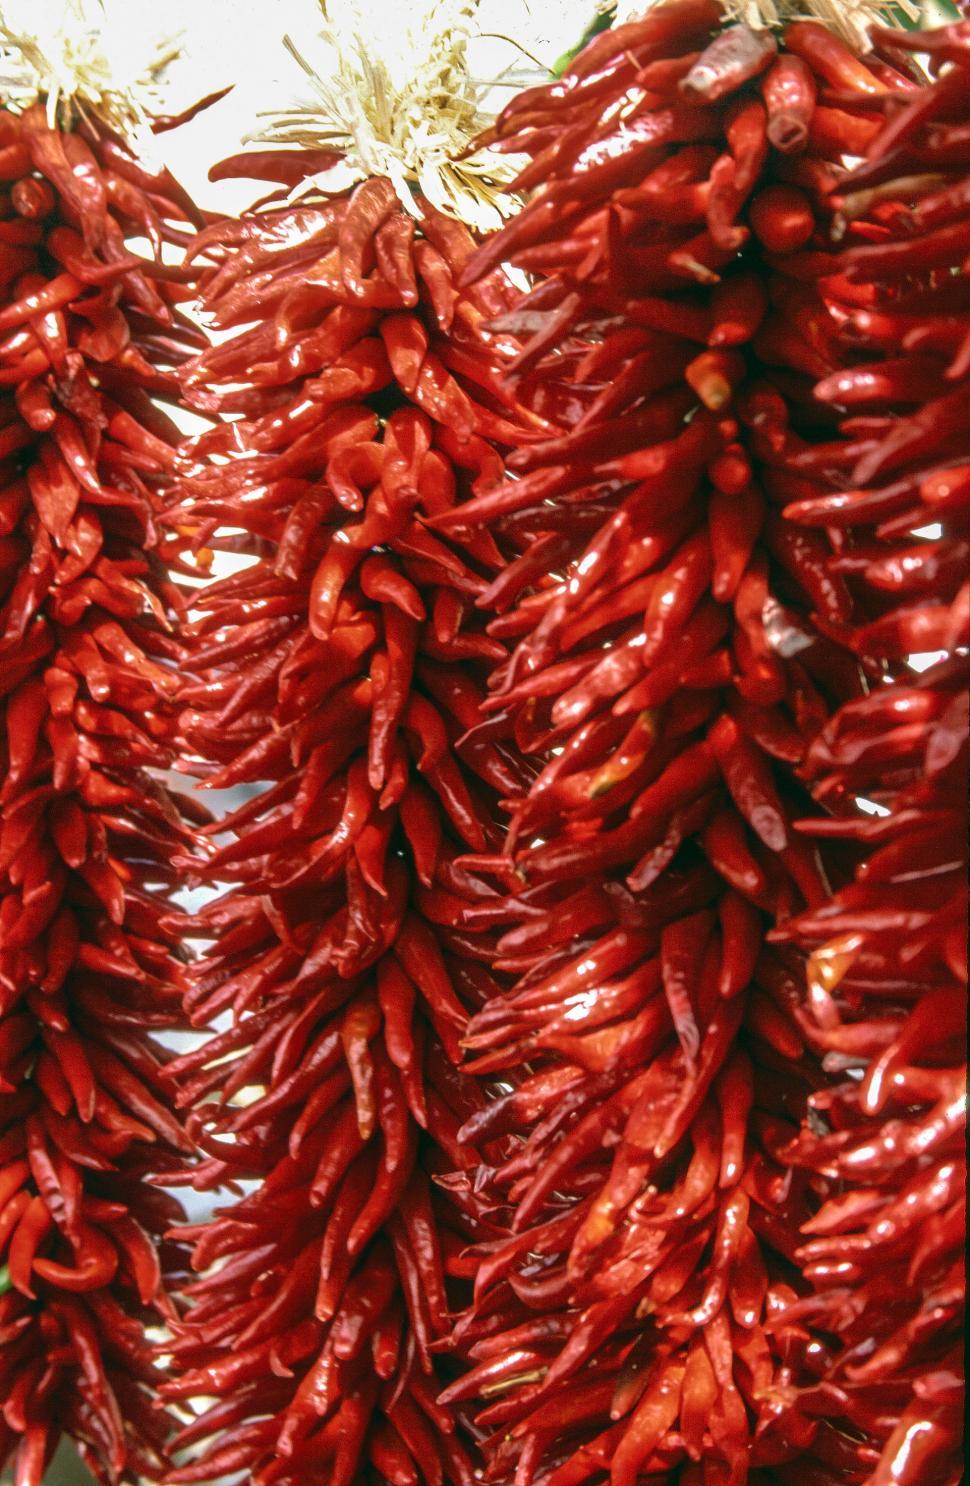 Download Free Stock Photo of Red chillies 